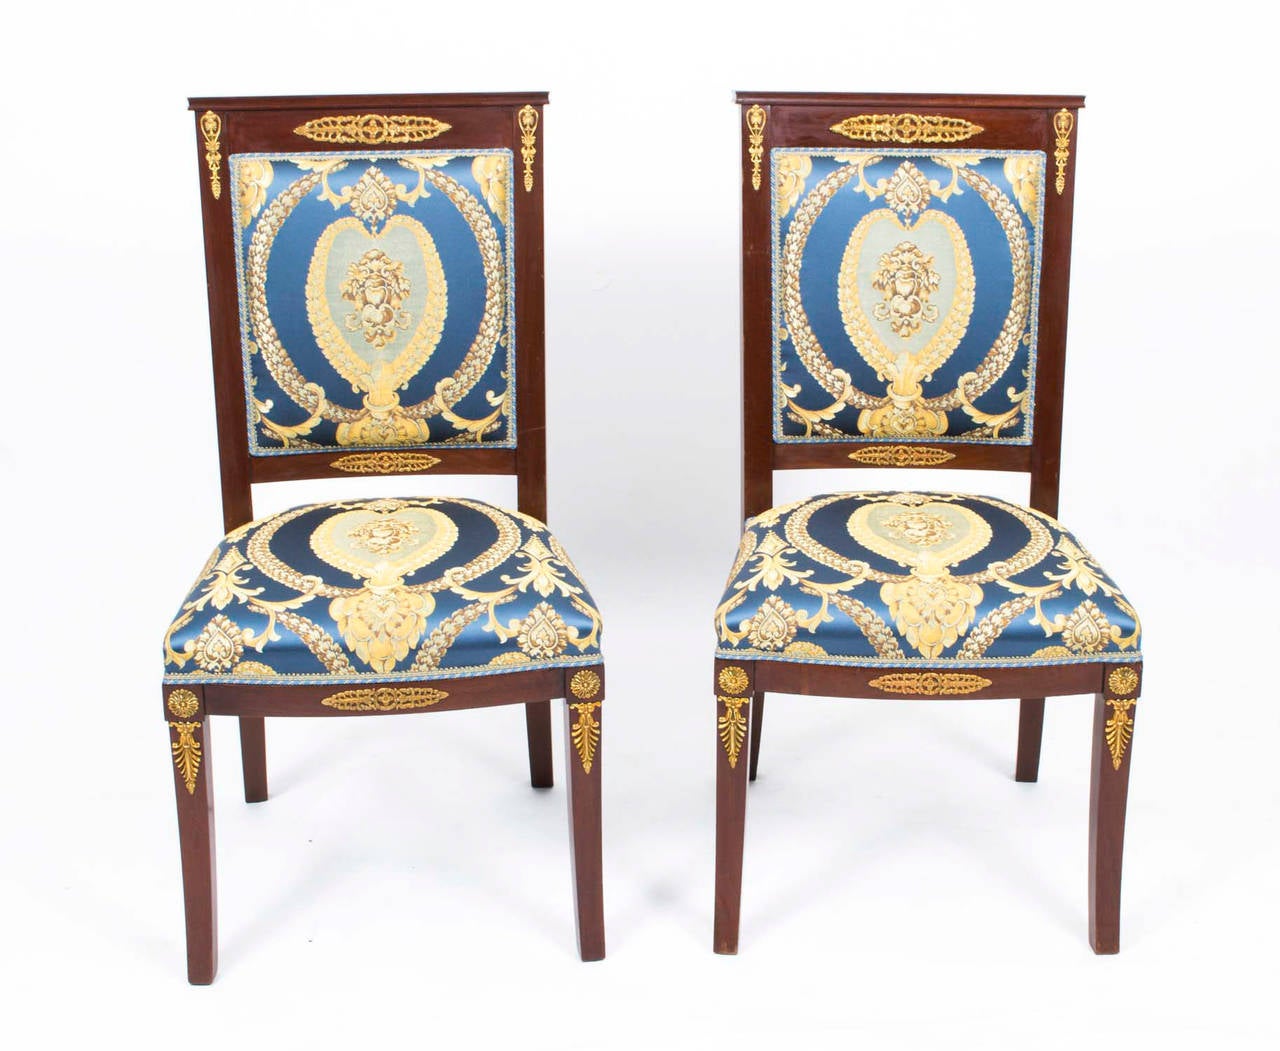 This is an elegant antique set of eight mahogany dining chairs in the fabulous Empire style, circa 1920 in date. 

The mahogany is beautiful in colour and has been embellished with striking ormolu mounts typical of the Empire period. Each chair